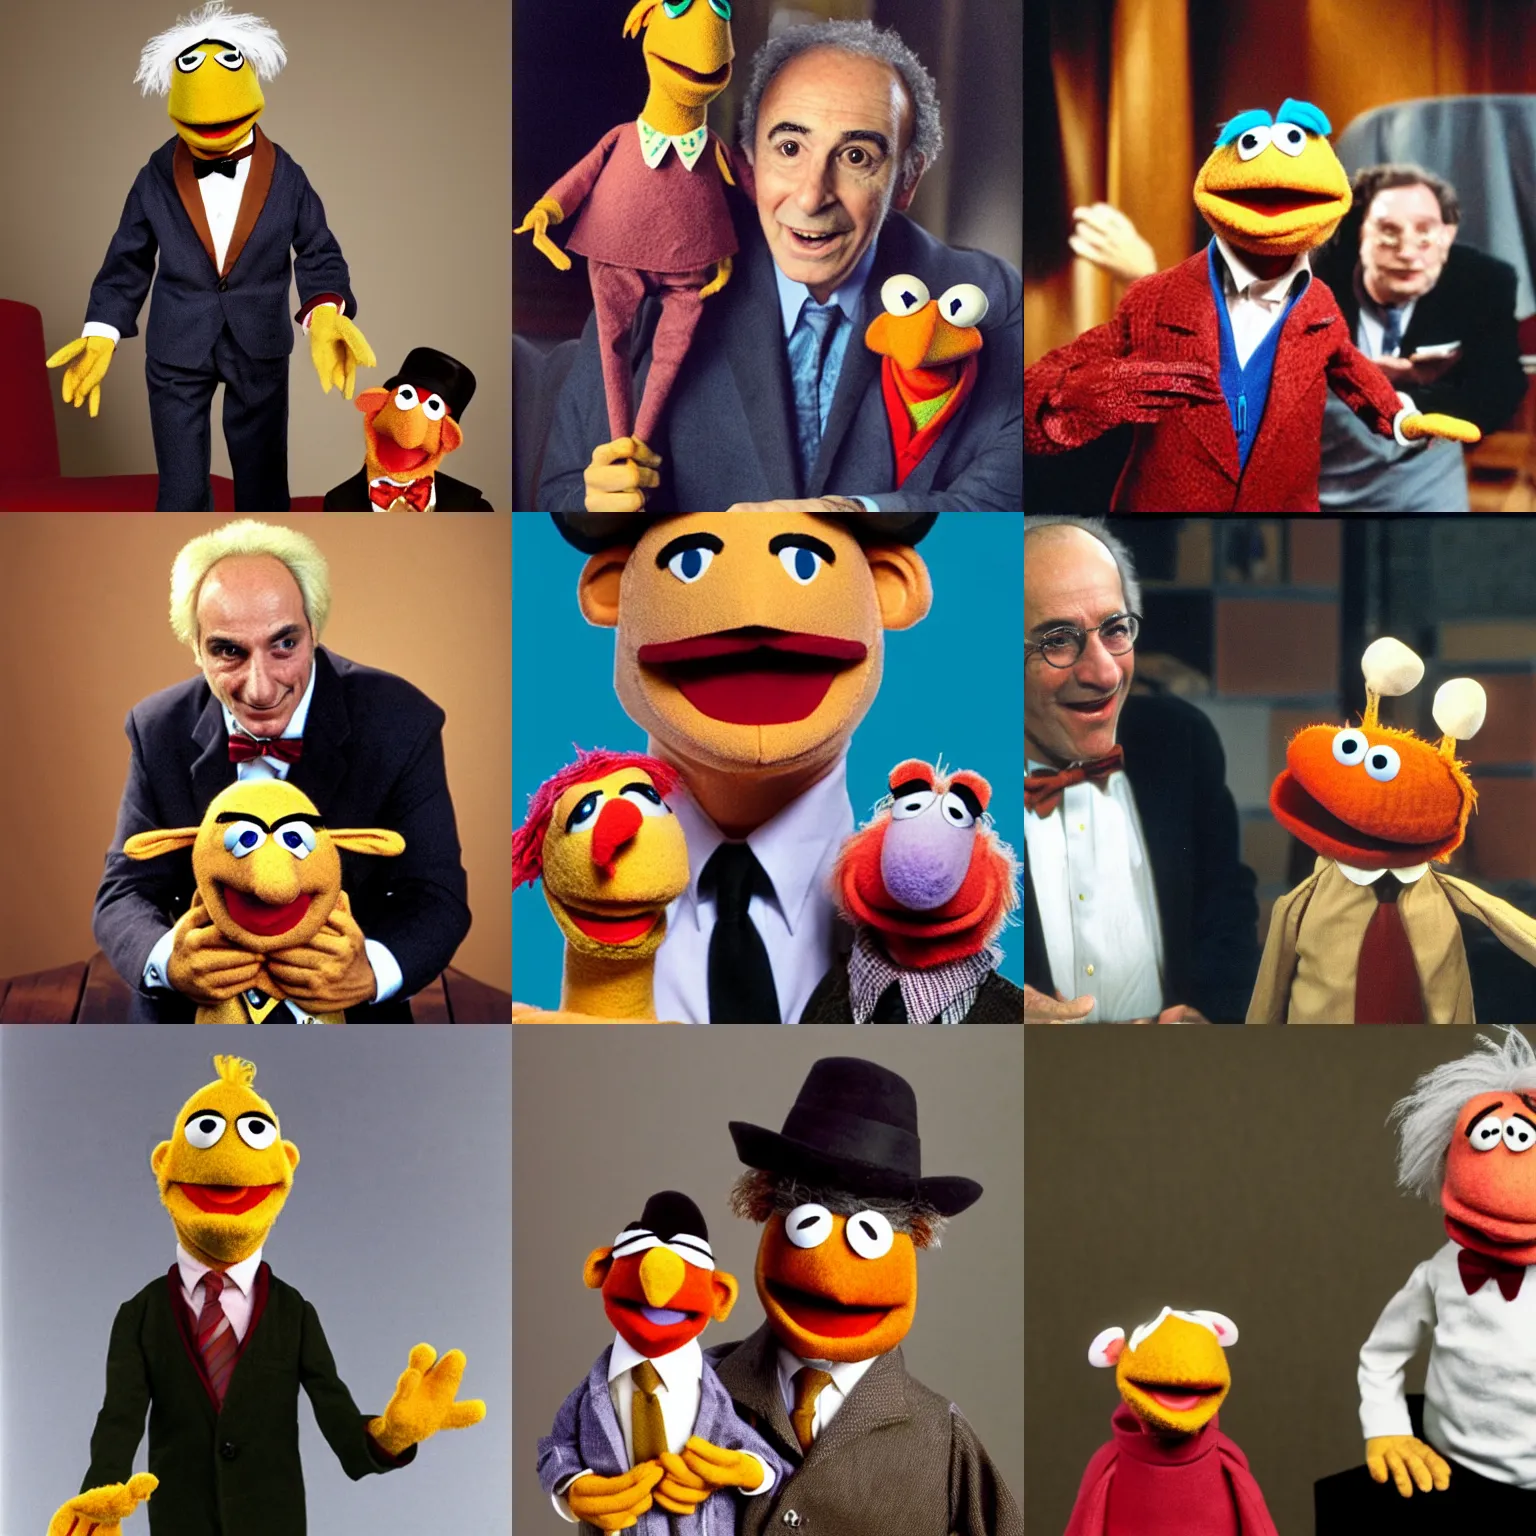 Prompt: Saul Goldman as a puppet in the Muppets